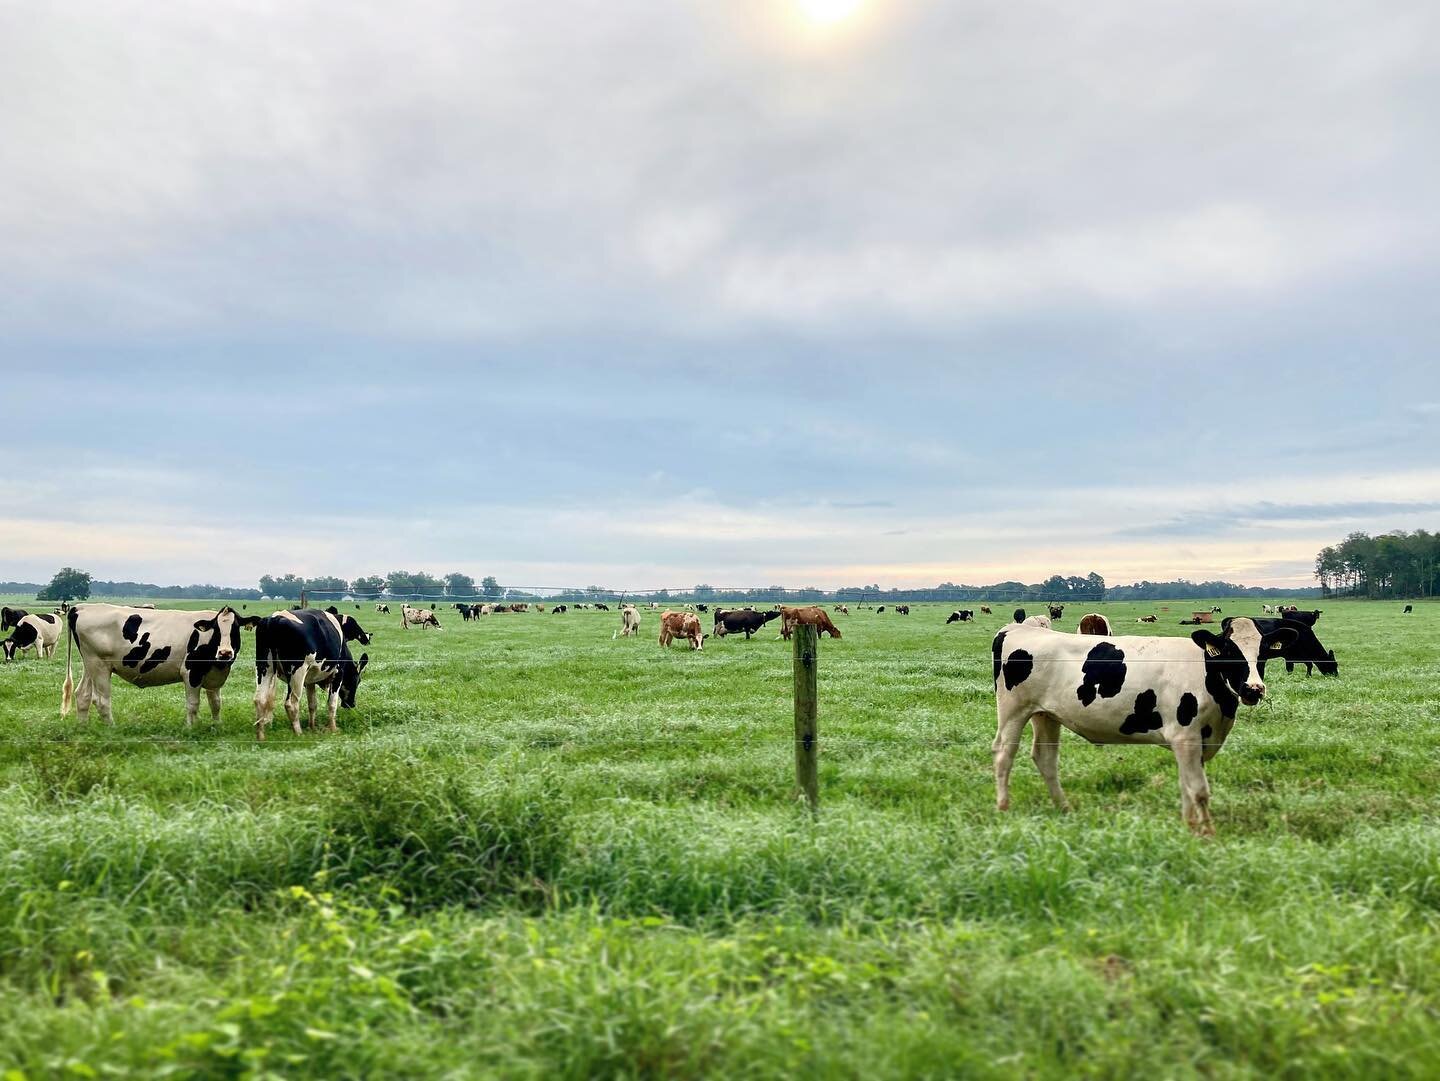 Low Country cattle, August 2020.
.
Also, because @neem73 loves cows!
.
.
.
#SouthCarolina #LowCountry #Cows #Cattle #Travel #RoadTrip #StepOutside #Photographer #CreateAndCapture #Americana #Farm #FarmLife #goforadrive #Throwback #LaterGram #MakePict